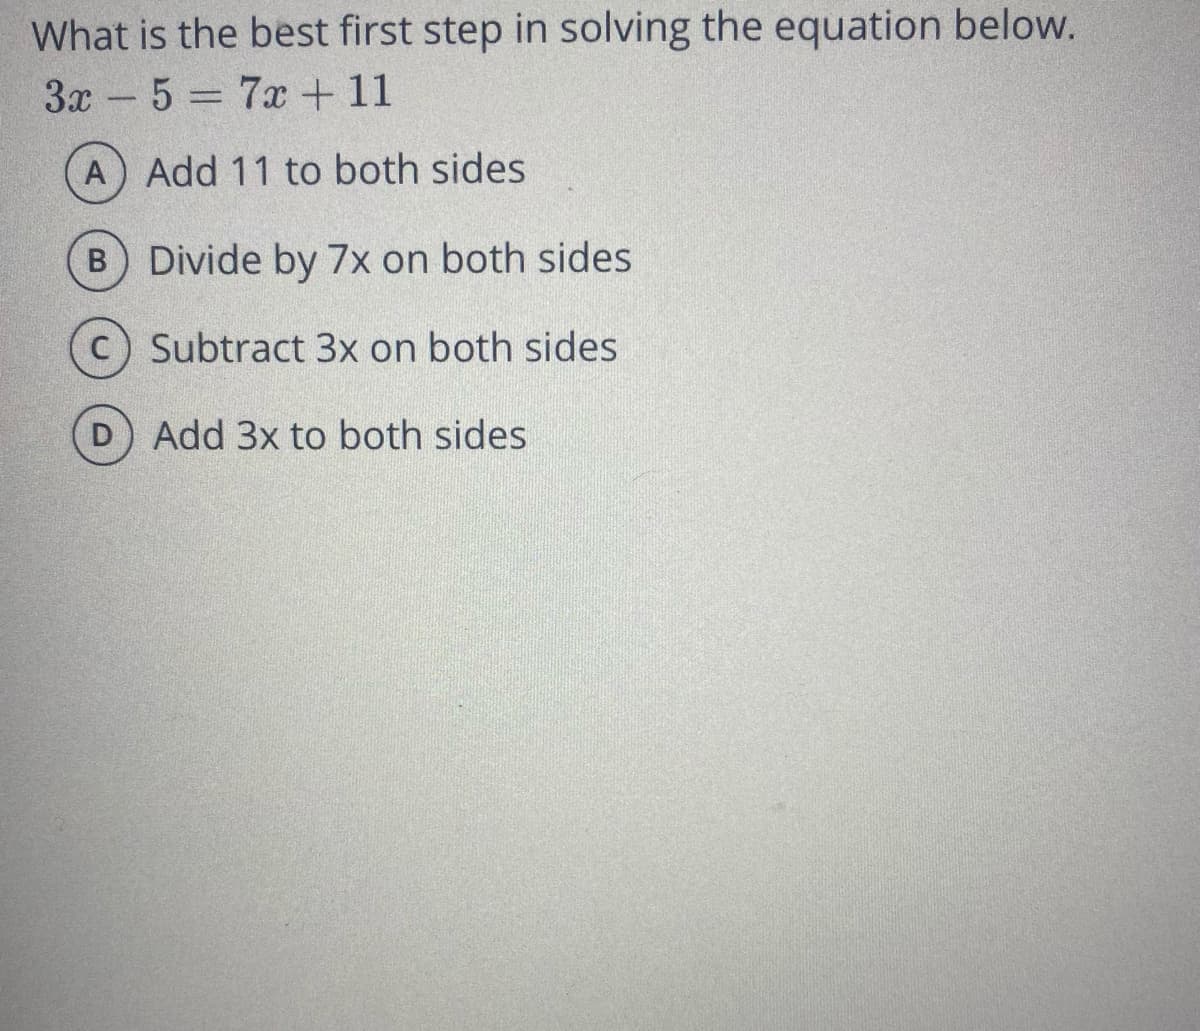 What is the best first step in solving the equation below.
3x - 5 = 7x + 11
A Add 11 to both sides
B Divide by 7x on both sides
(c) Subtract 3x on both sides
D Add 3x to both sides
